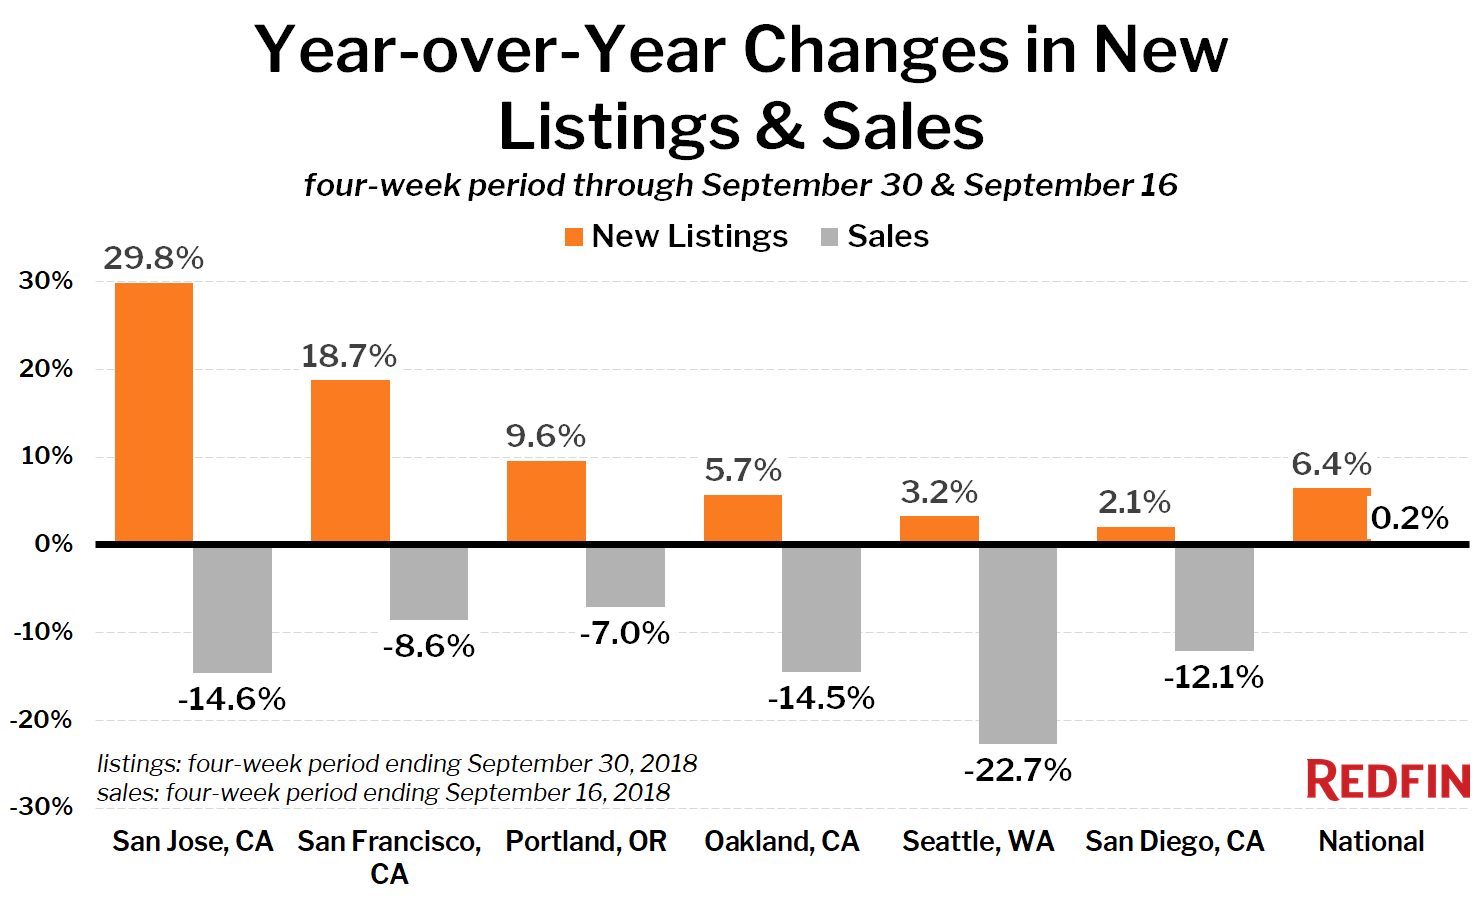 Year-over-Year changes in New Listings & Sales